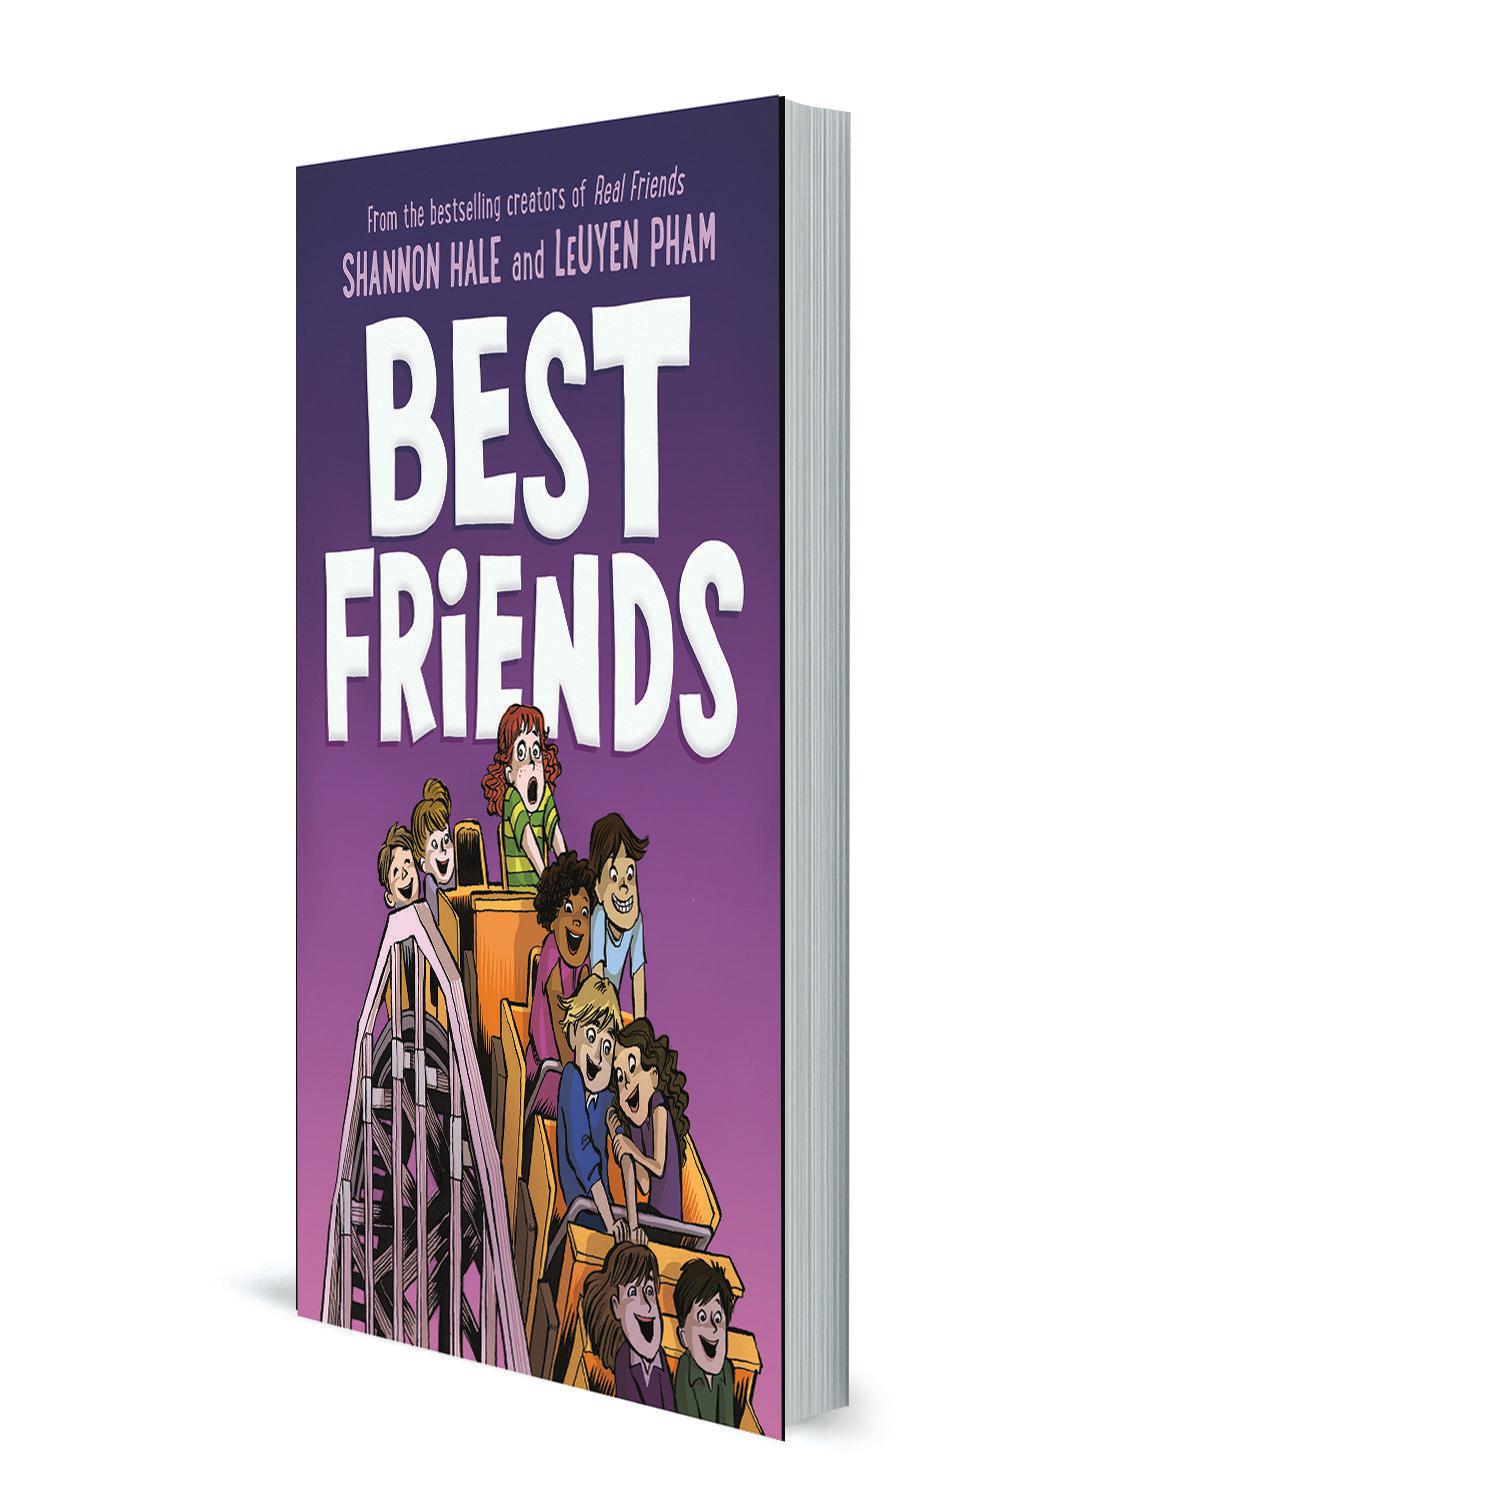 Books and friends. Книга my friends. Real friends book. @Books_friends46. Книга друг.